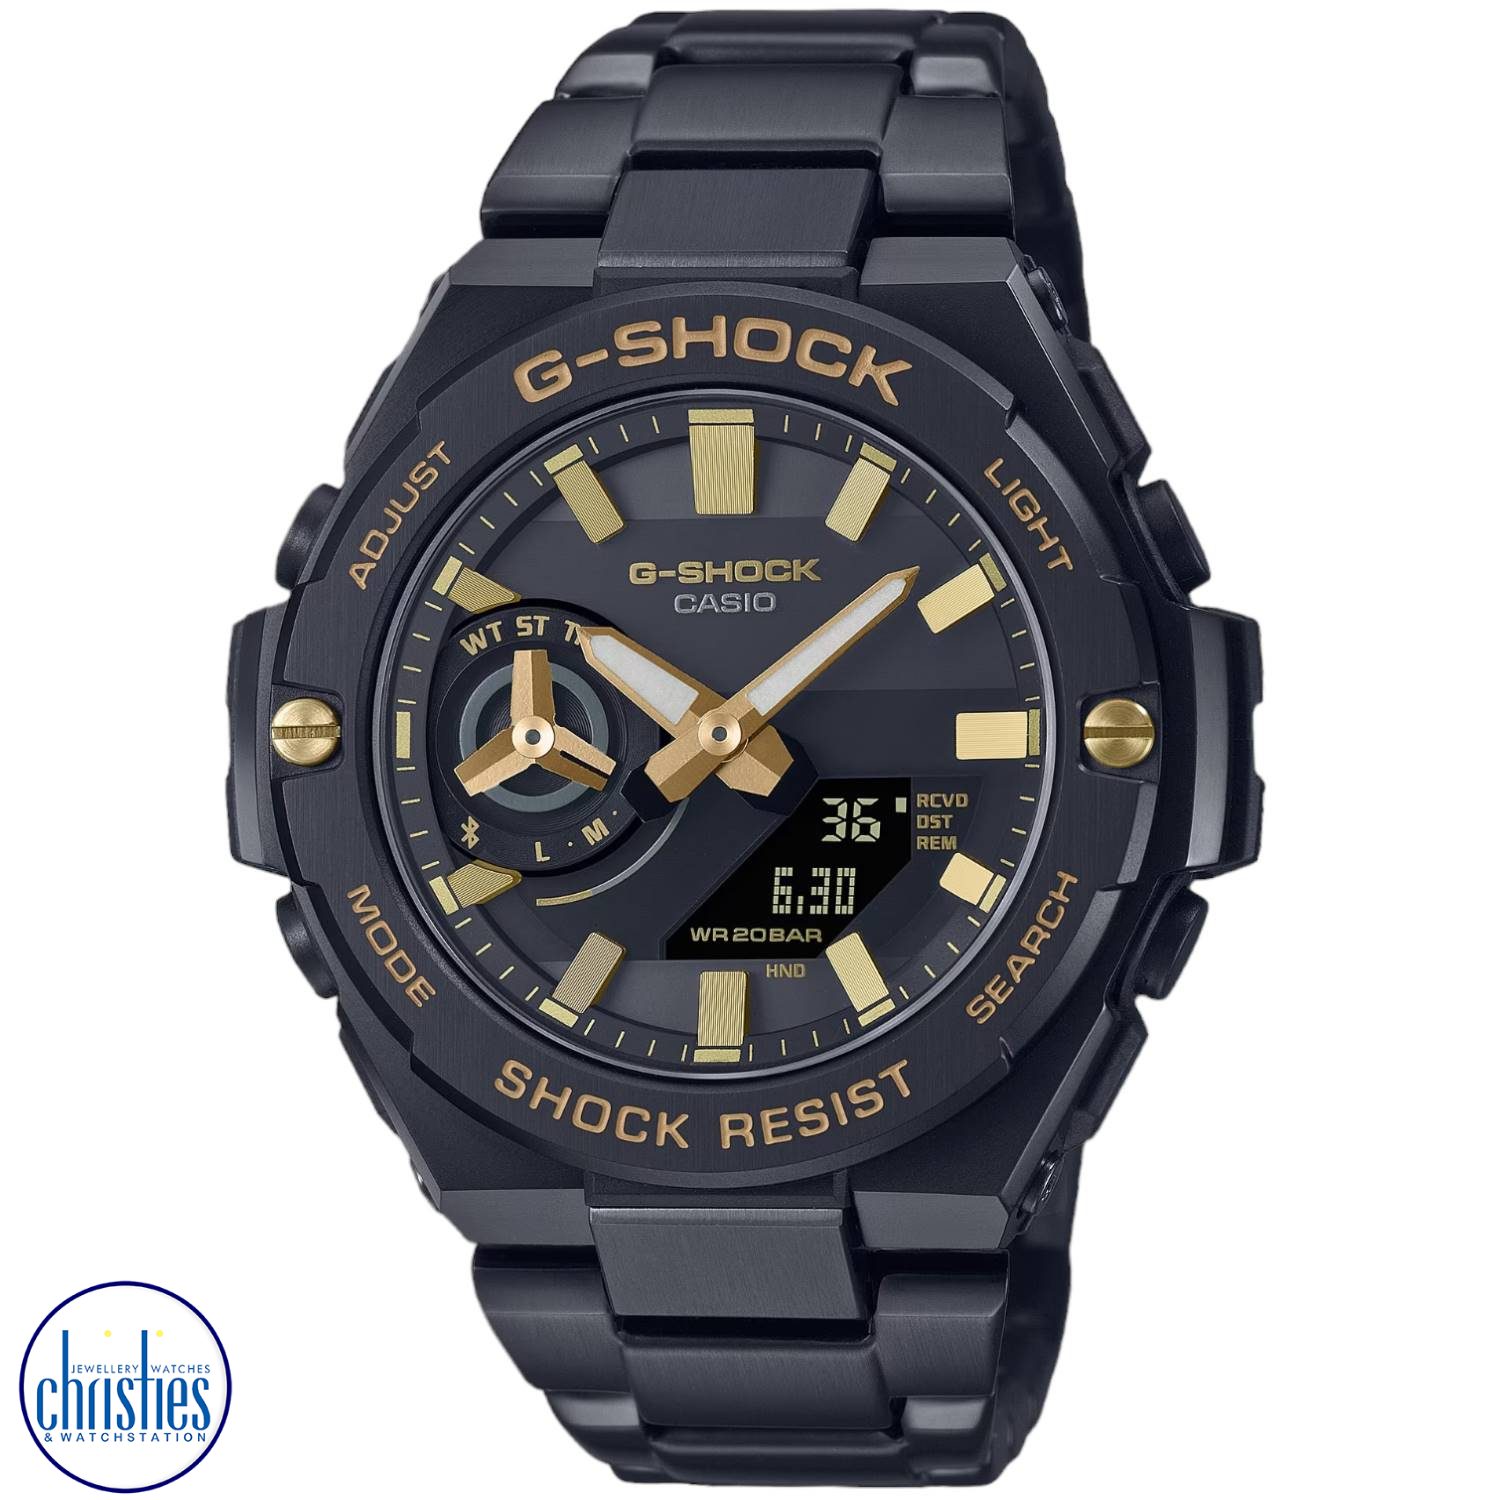 GSTB500BD-1A9  Casio G-Shock G-STEEL Solar All Black  Watch. The GST-B500 line brings together smaller components and high-density mounting, continuing to deliver Bluetooth connectivity and solar power charging but in an even slimmer profile.